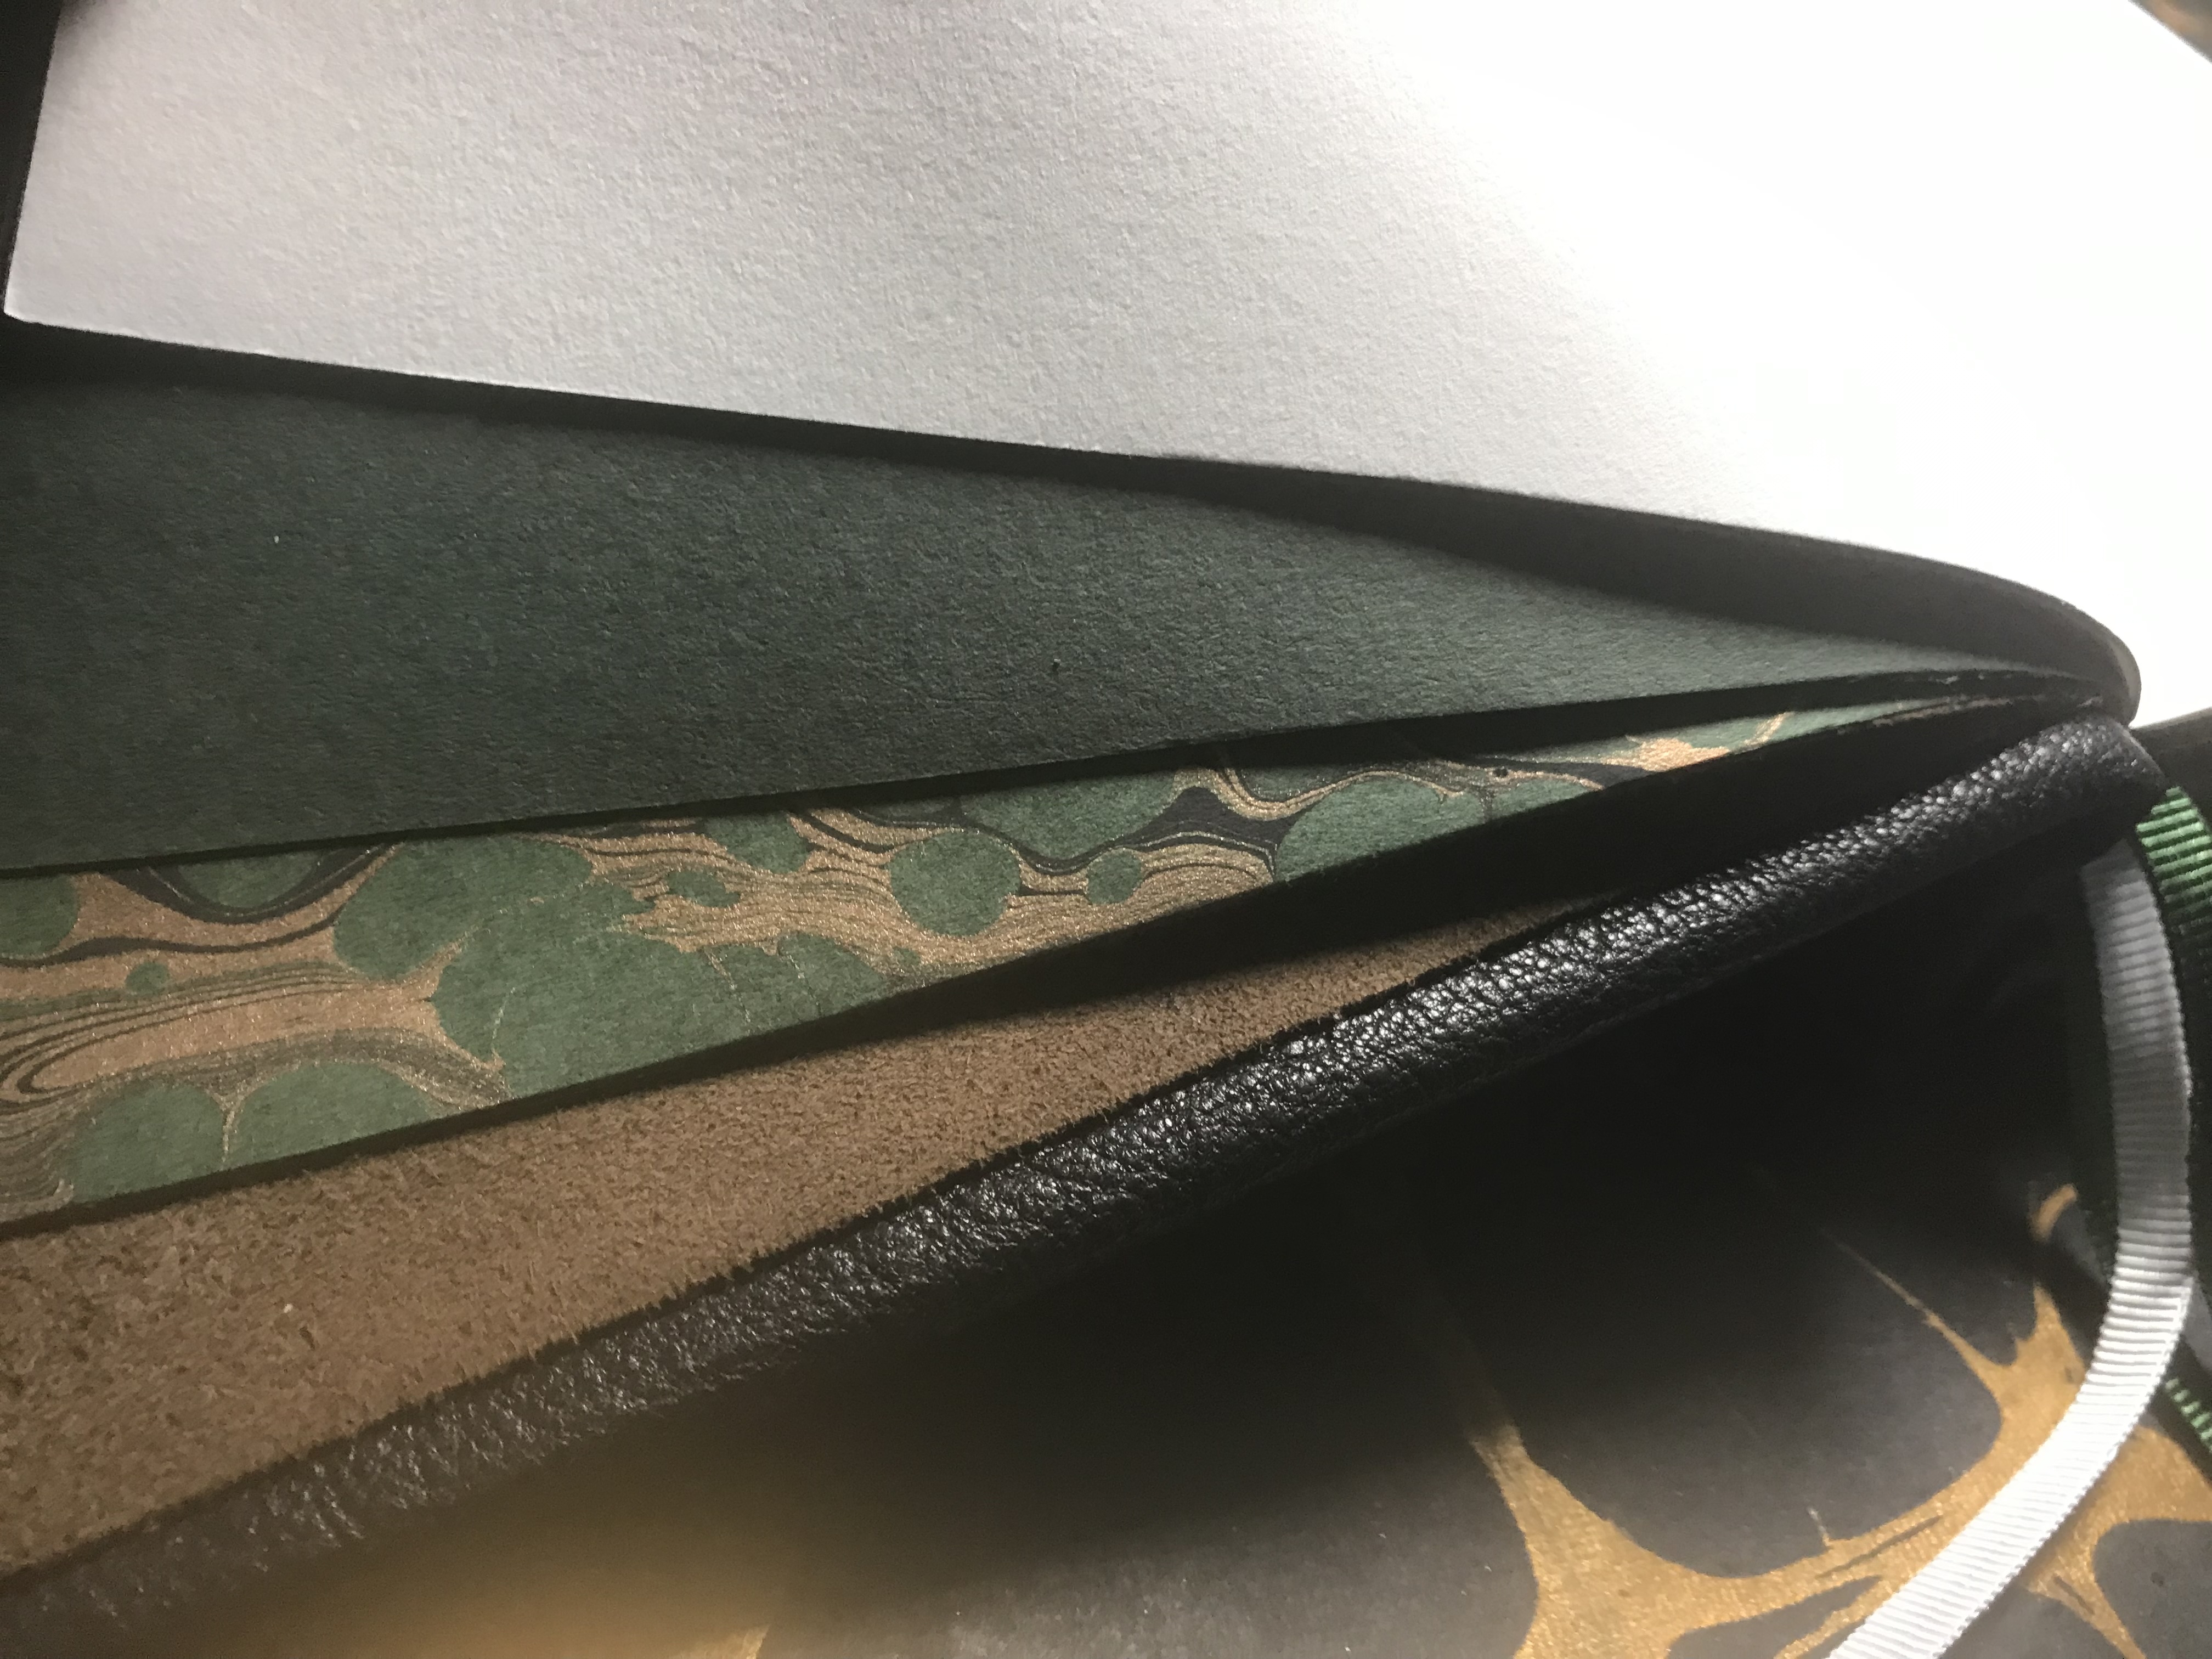 Hard crafted leather bound hardback book with suede, marbling and different textures and sensations